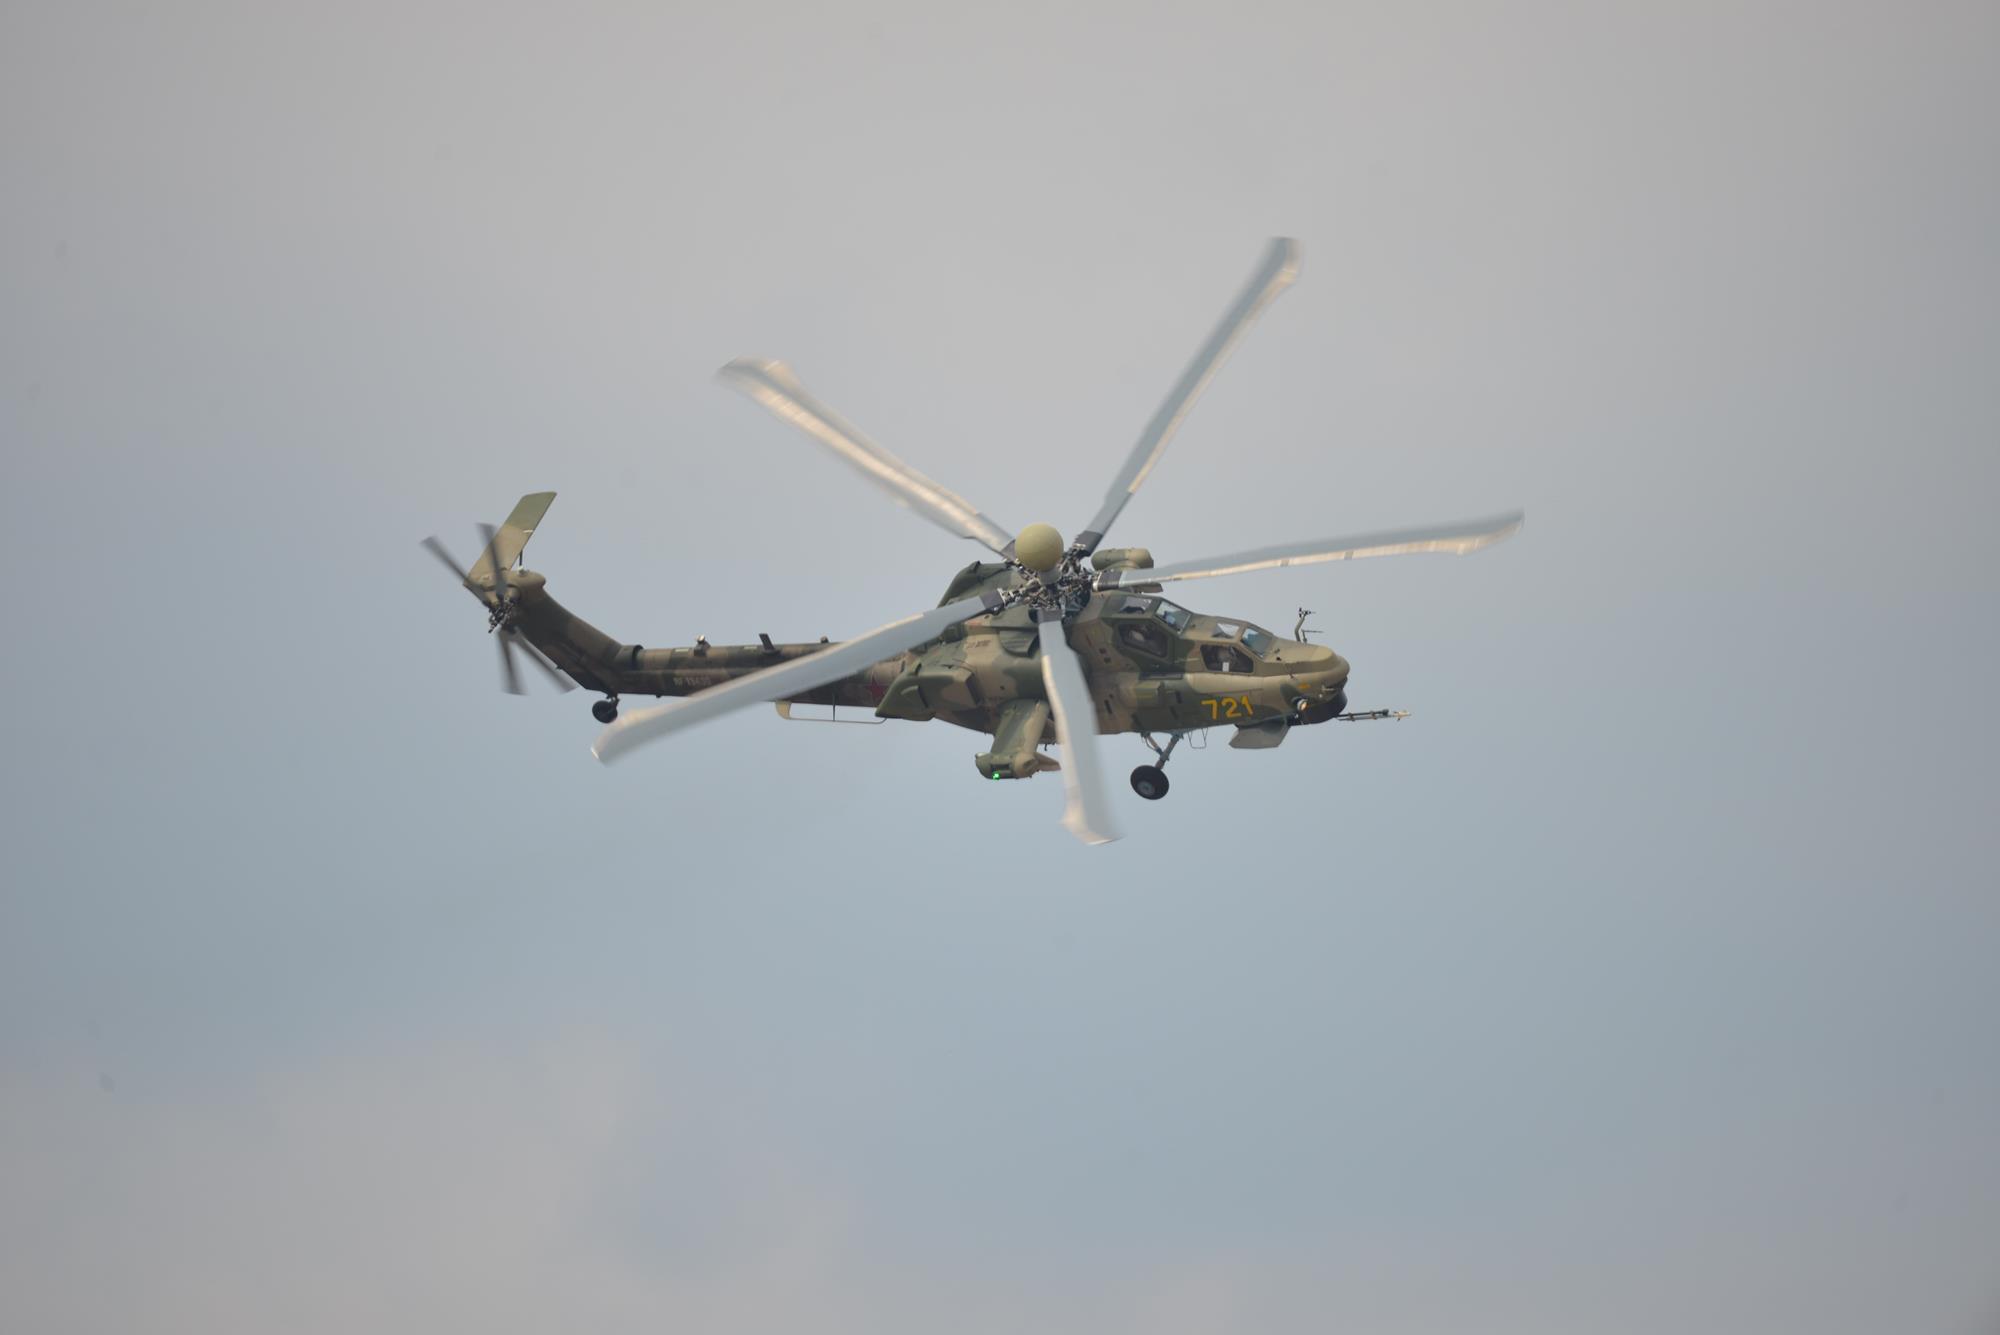 Report: Iran wants to receive Russia’s attack helicopters